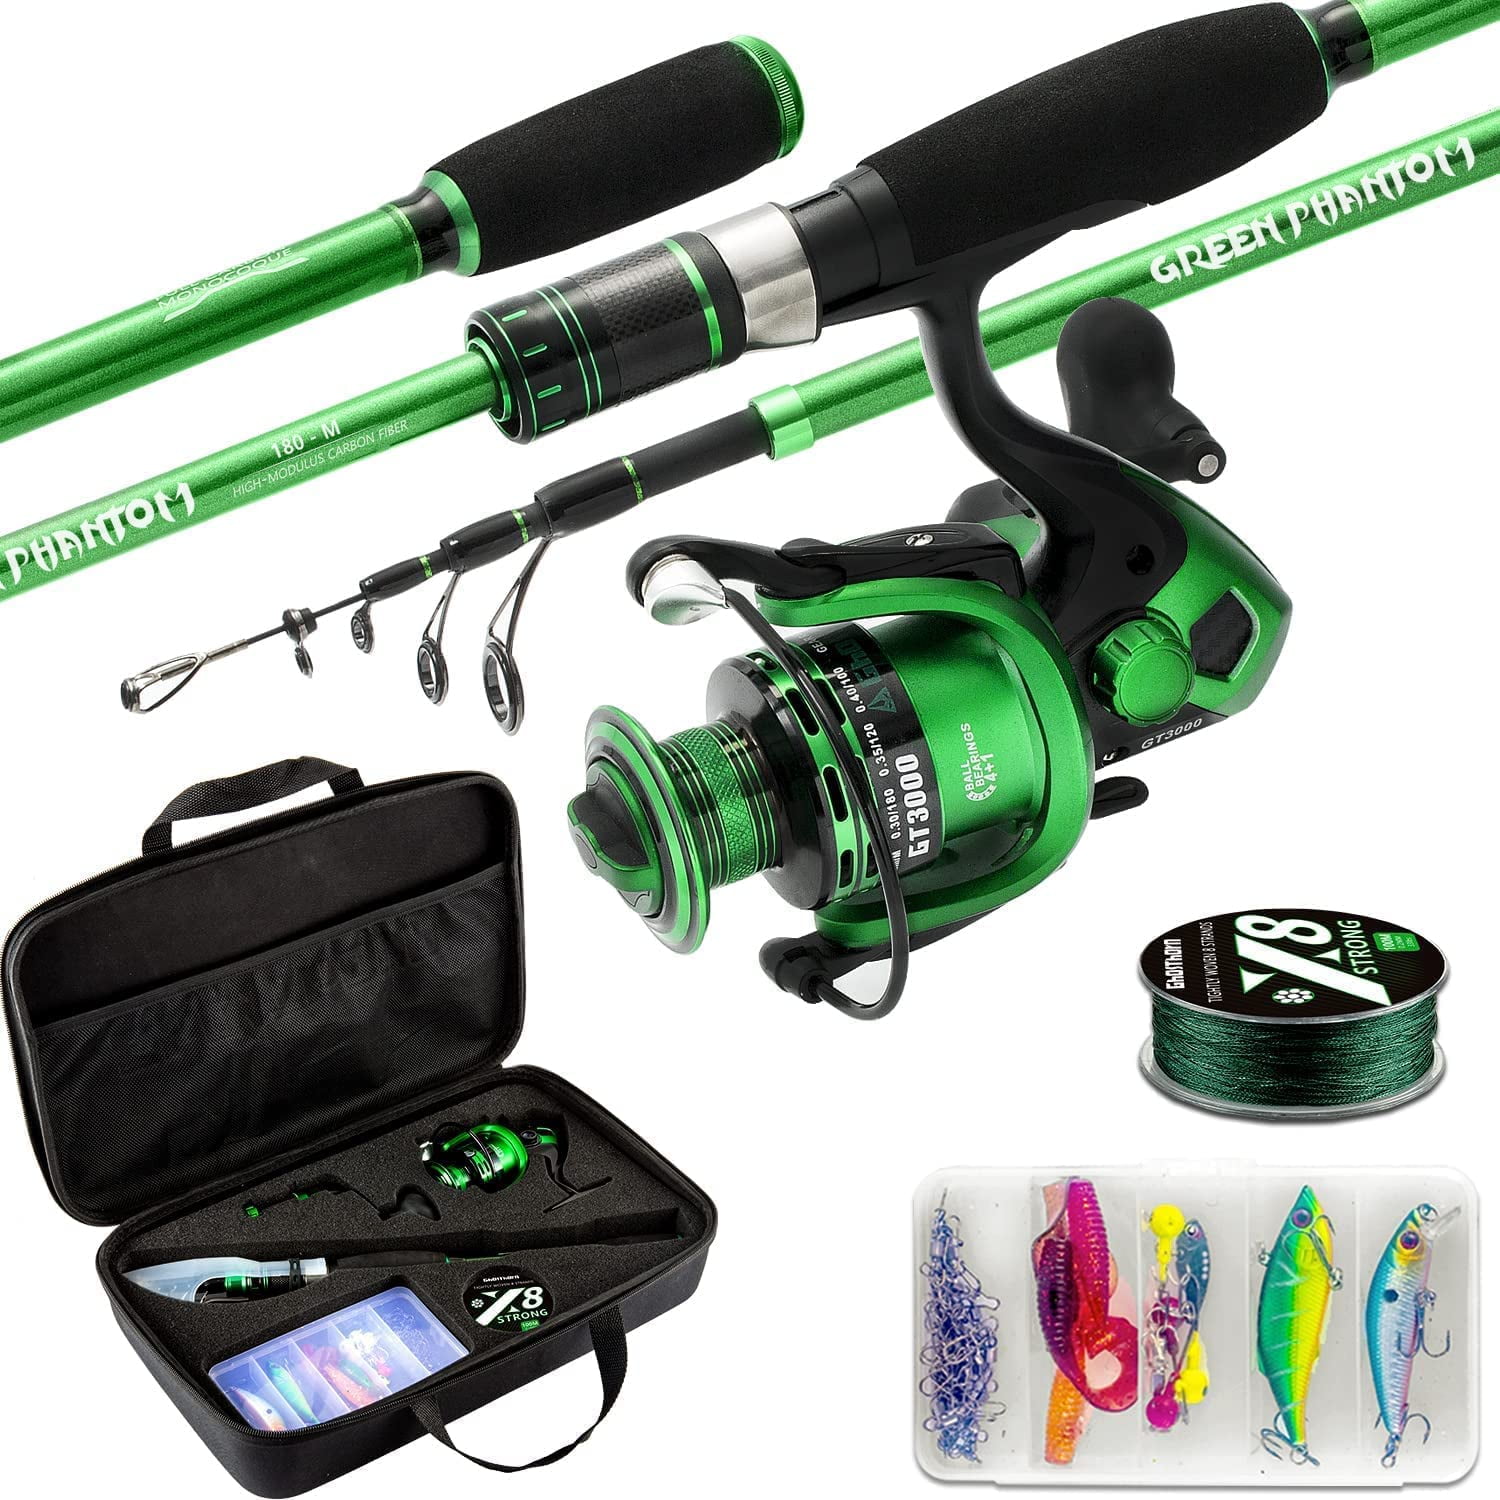 Buy Fishing Rod and Reel Combos, Unique Design with X-Warping Painting,  Carbon Fiber Telescopic Fishing Rod with Reel Combo Kit with Tackle Box,  Best Gift for Fishing Beginner and Angler (240 Bule)